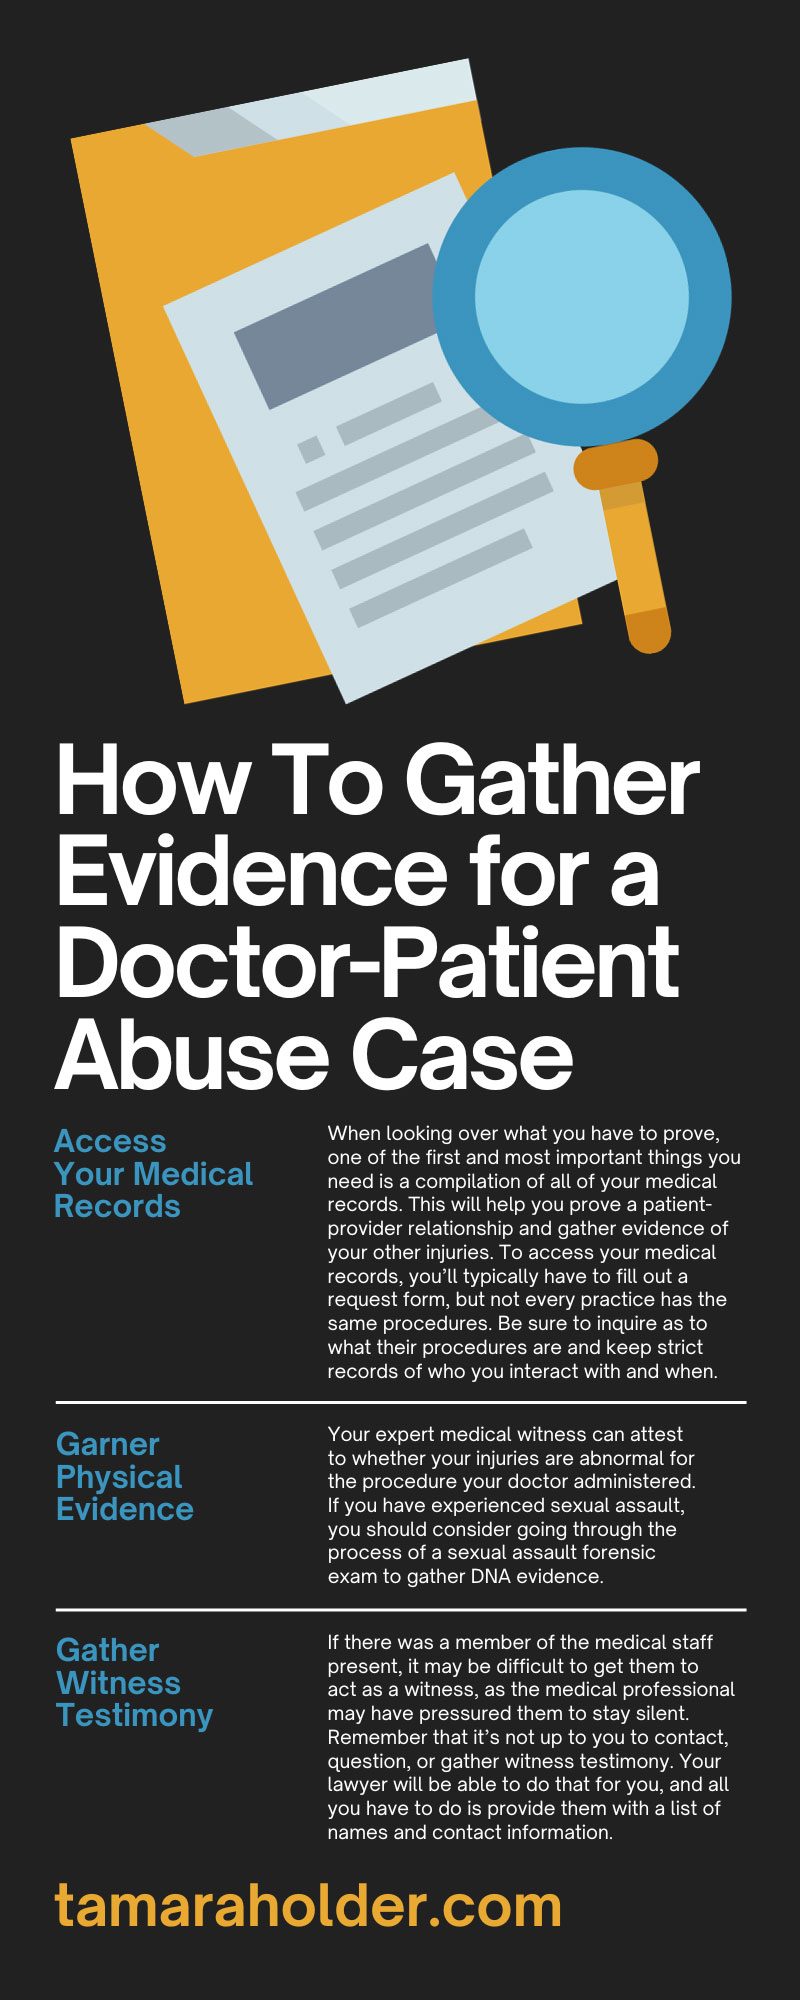 How To Gather Evidence for a Doctor-Patient Abuse Case